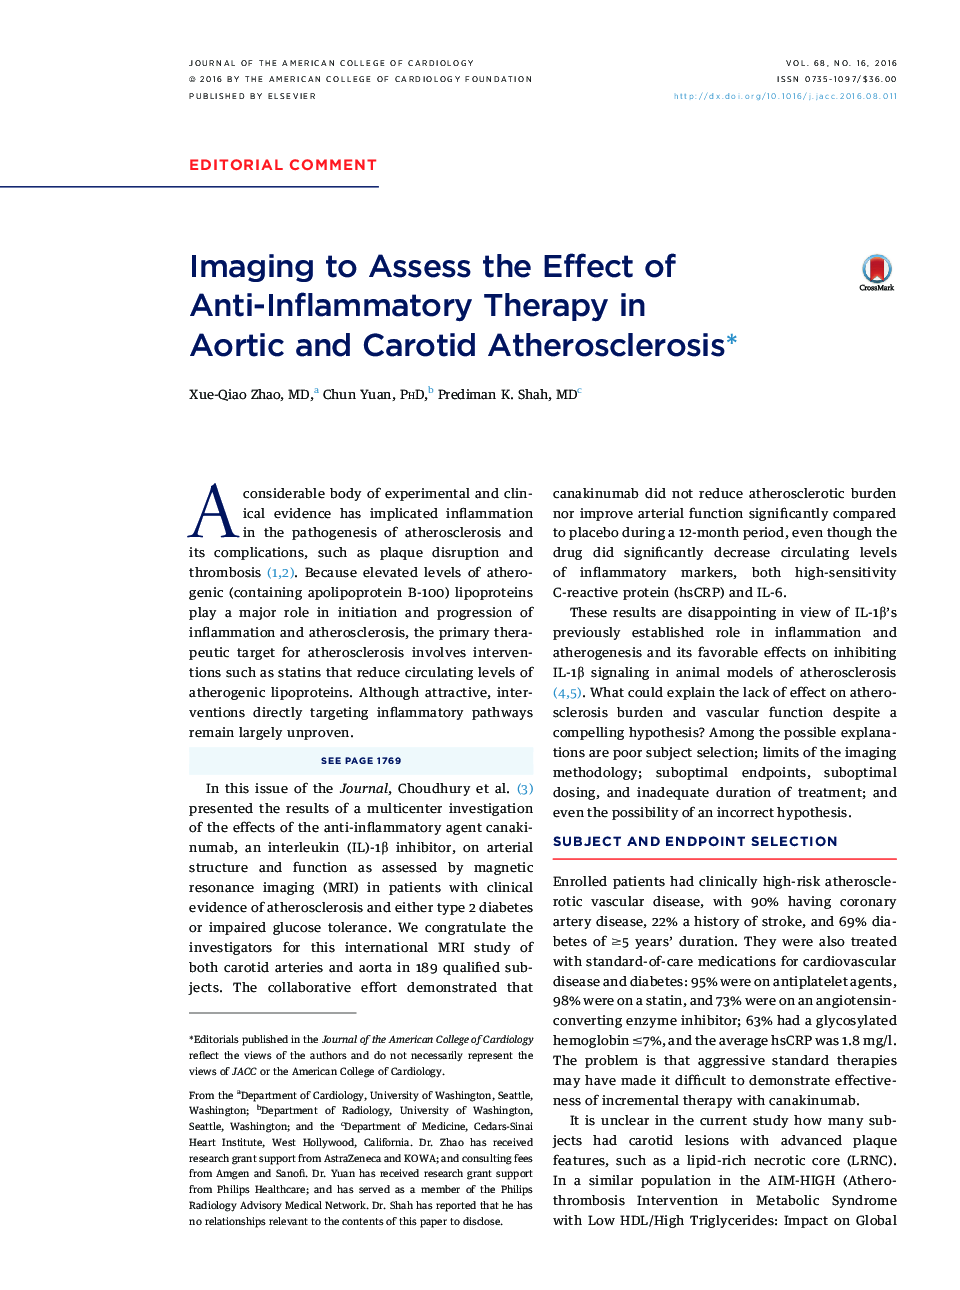 Imaging to Assess the Effect of Anti-Inflammatory Therapy in Aortic and Carotid Atherosclerosisâ